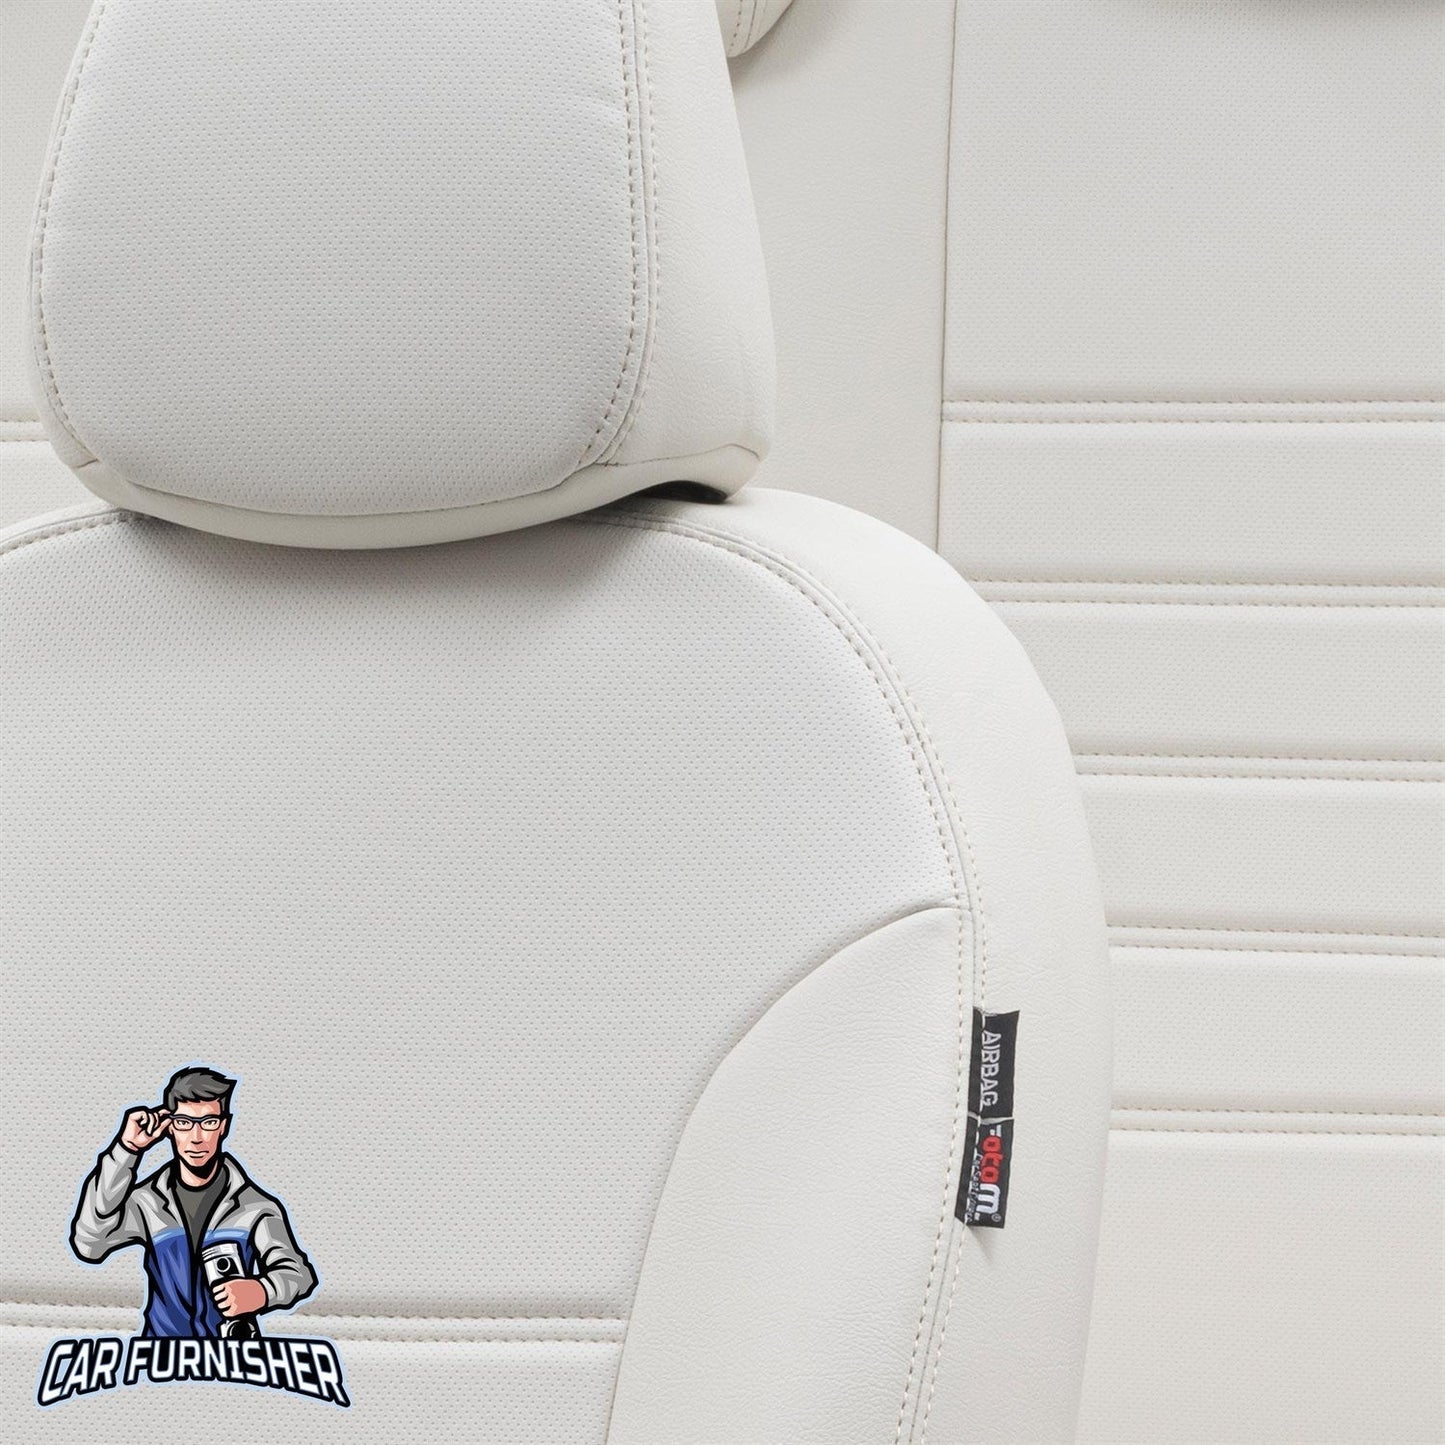 Opel Frontera Seat Cover Istanbul Leather Design Ivory Leather